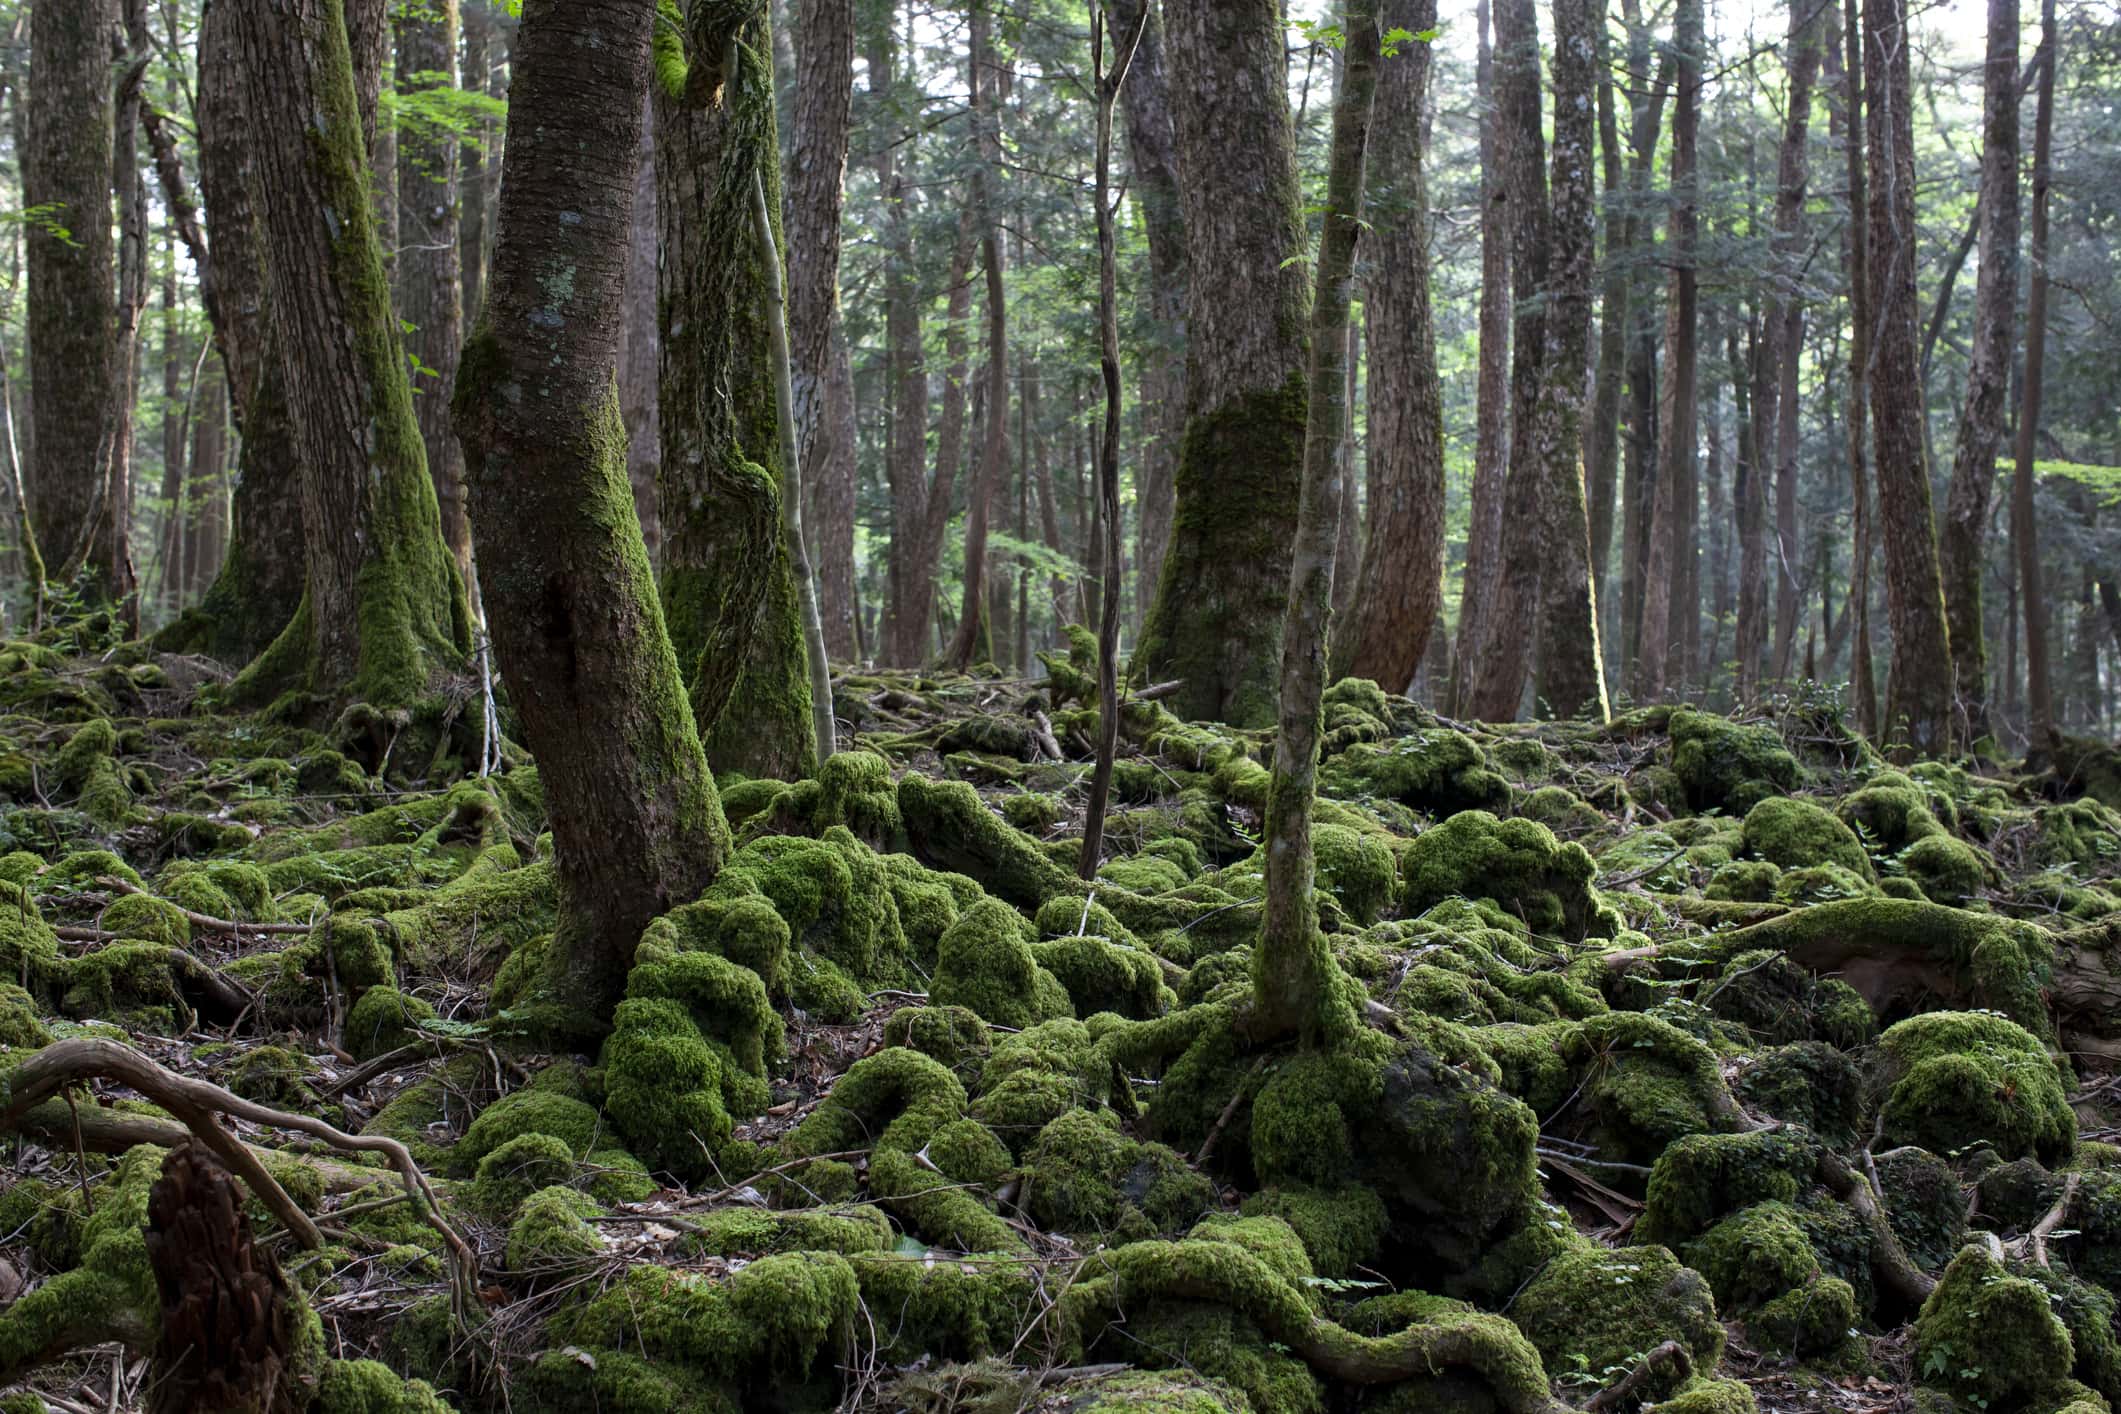 Aokigahara suicide forest in japan